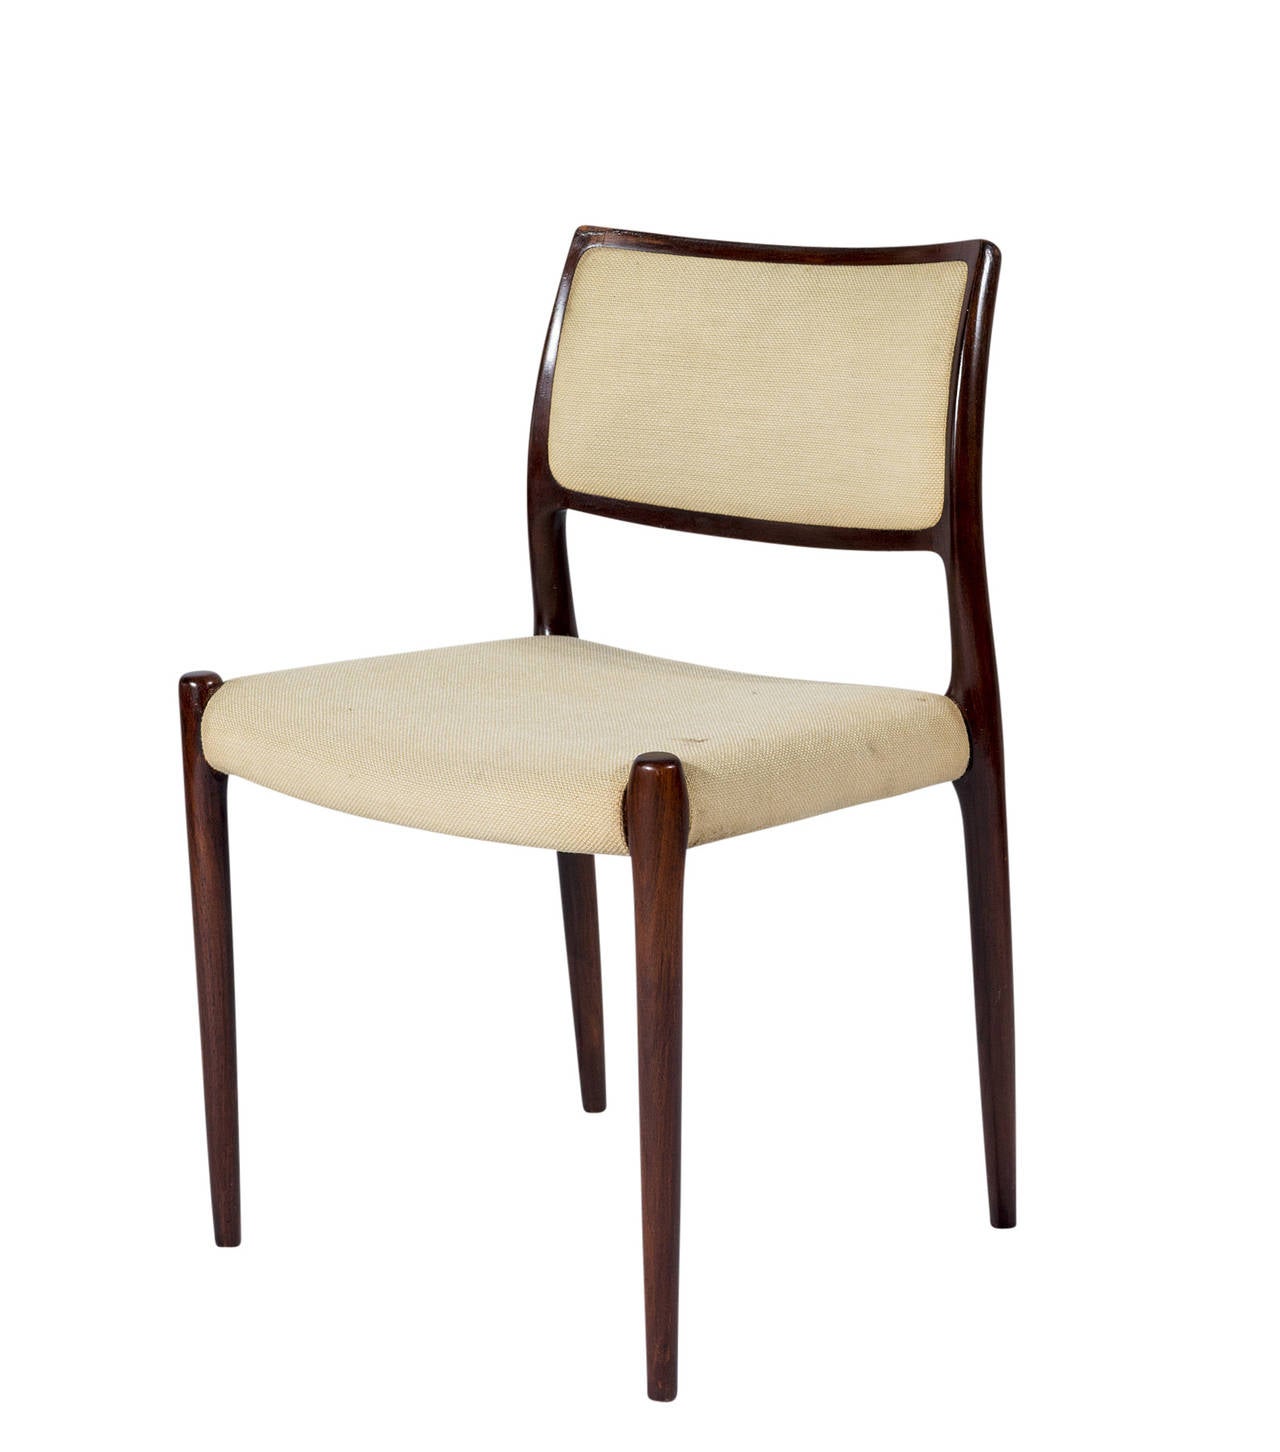 Set of eight rosewood Niels Møller model #80 dining chairs designed in 1968 and
produced by J. L. Moller Mobelfabrik.